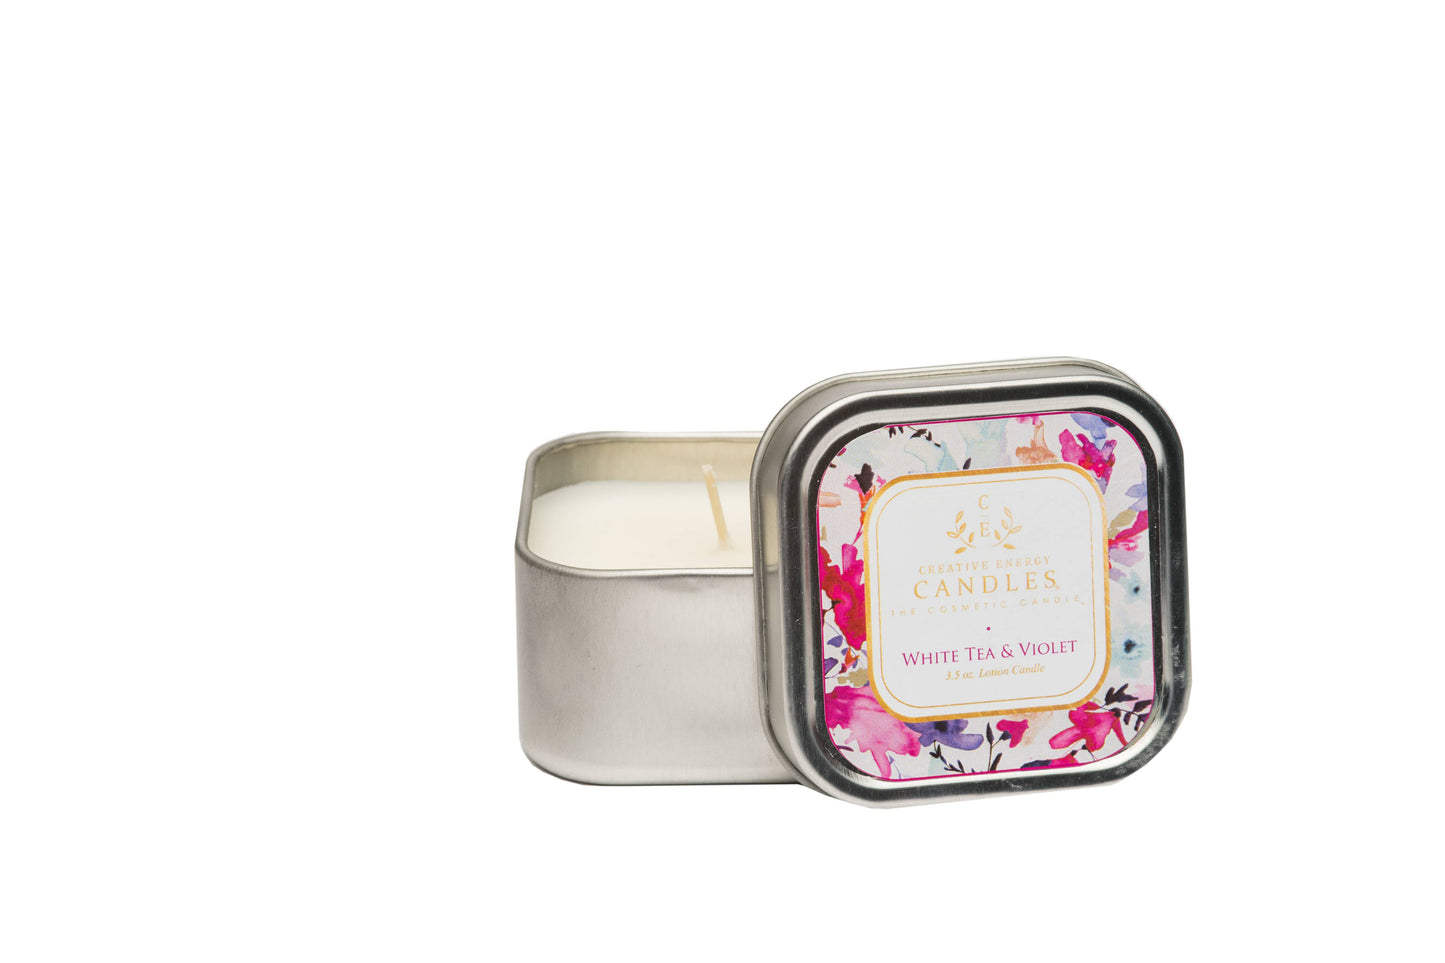 Creative Energy Candles - White Tea & Violet: 2-in-1 Soy Lotion Candle